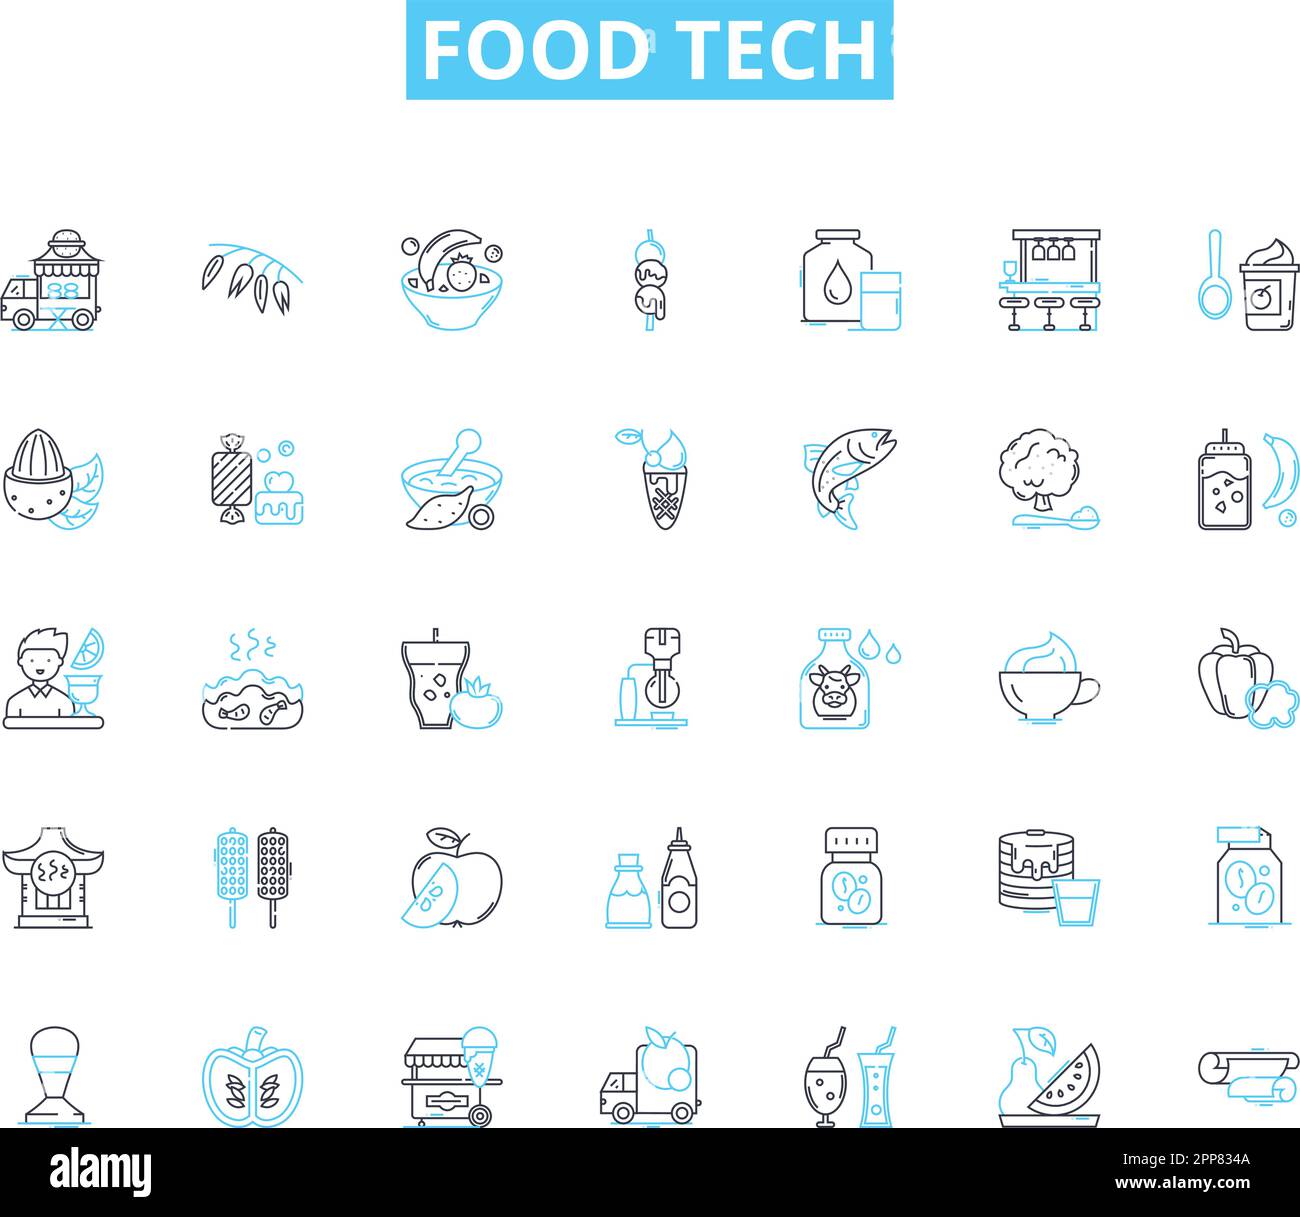 Food tech linear icons set. Automation, Biodegradable, Biosensors, Blockchain, Co-packaging, Cultured, Delivery line vector and concept signs Stock Vector